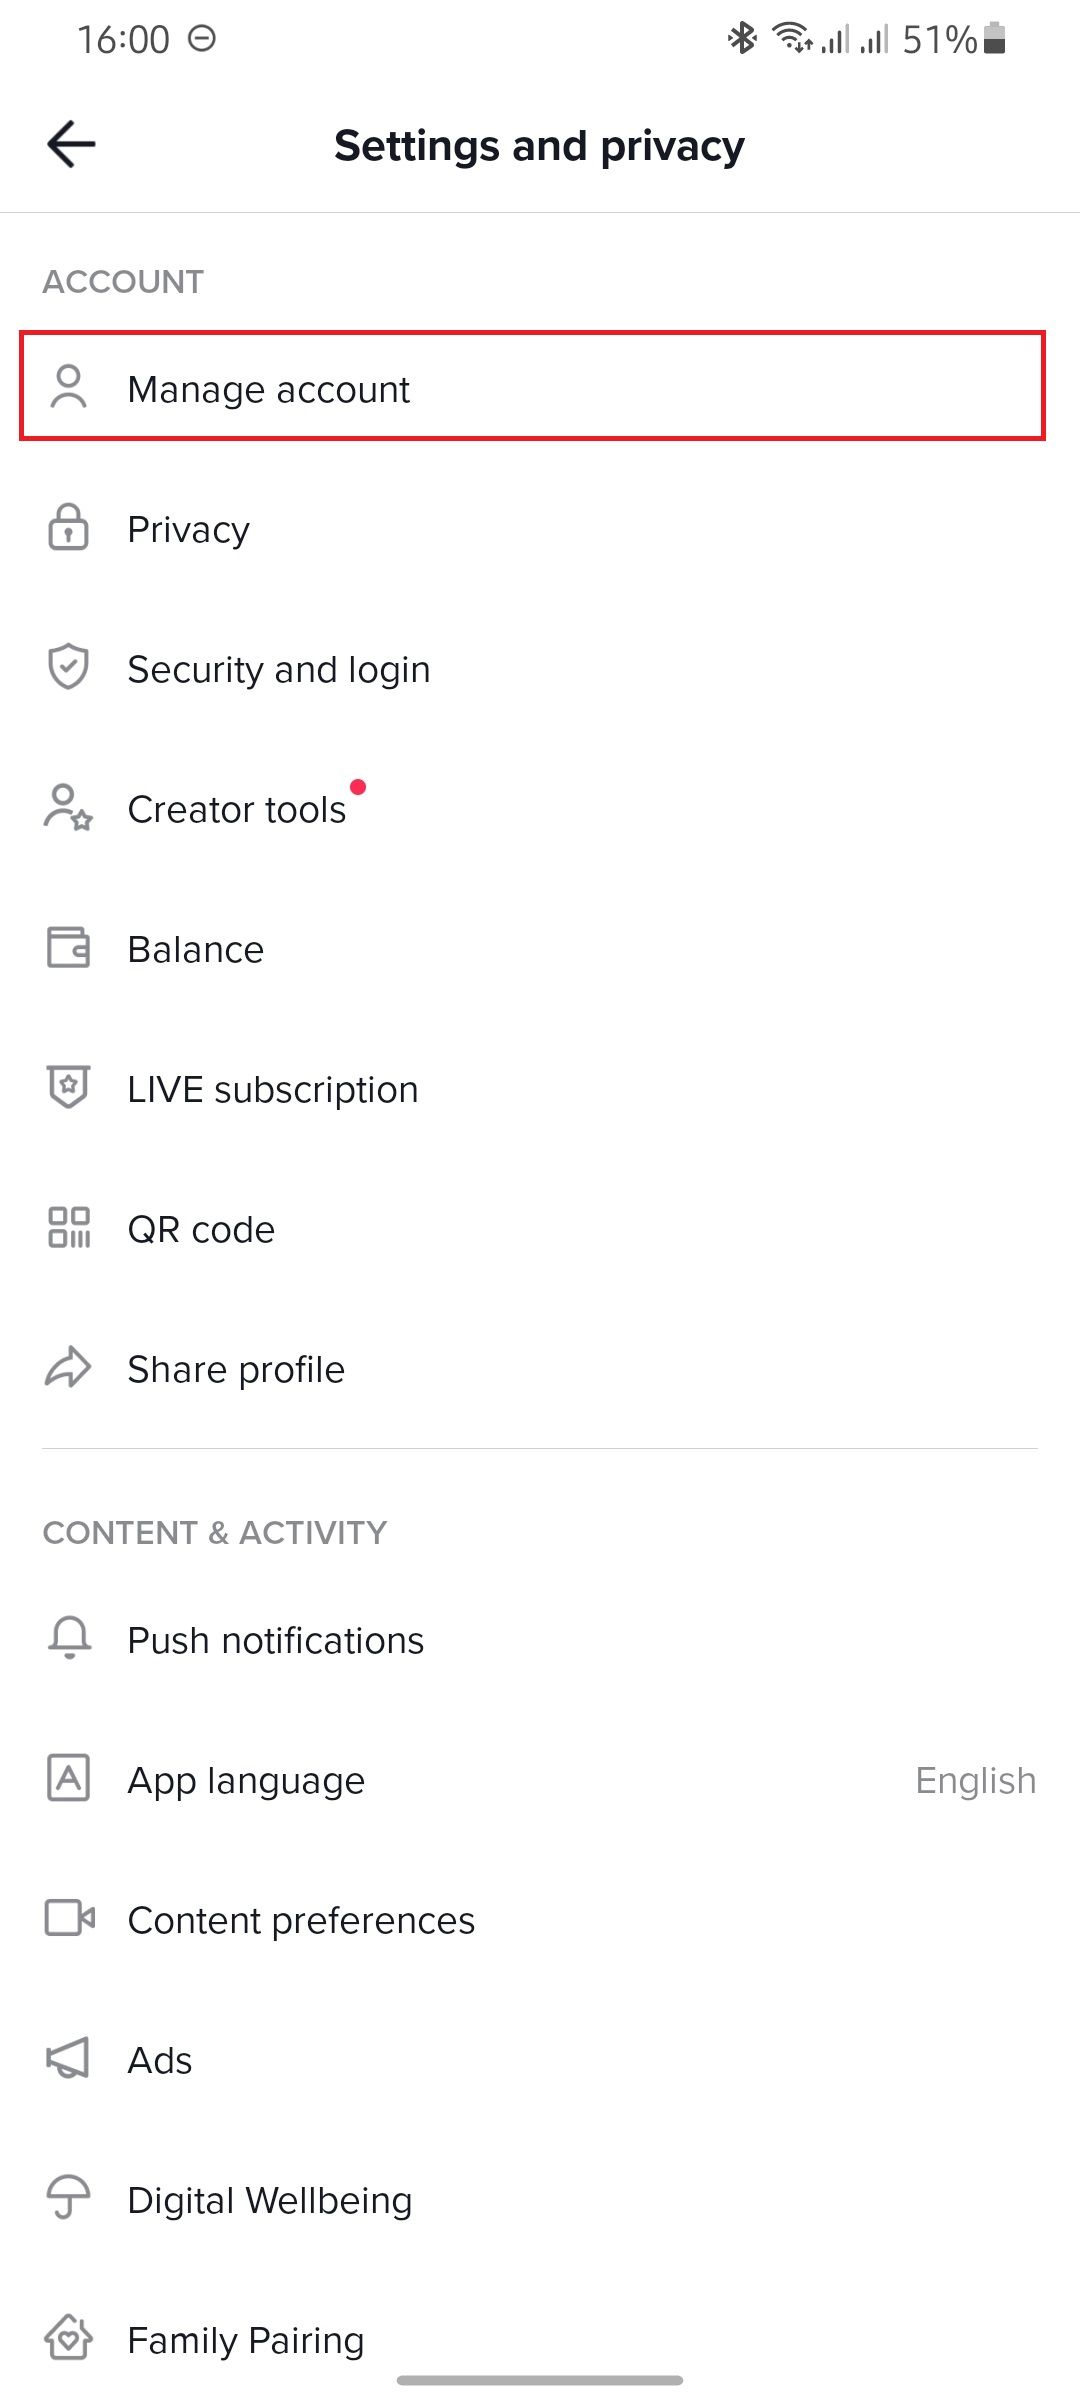 screenshot showing TikTok's security and privacy page